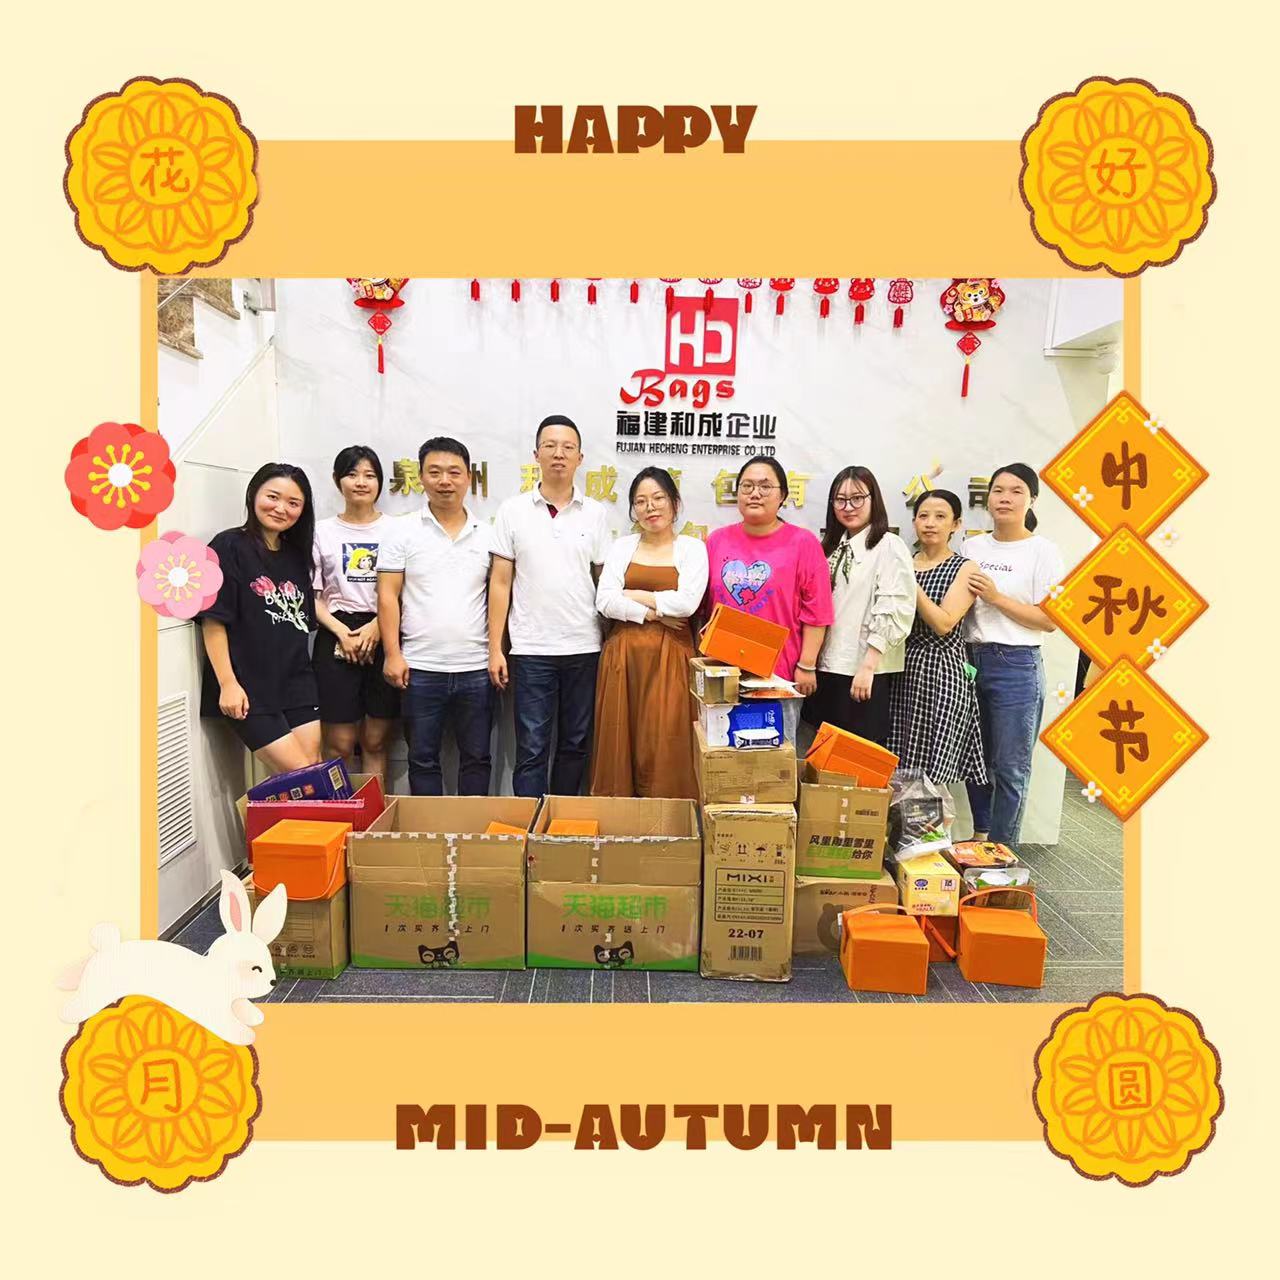 Happy Mid-autumn Festival, Hecheng Bags held a 